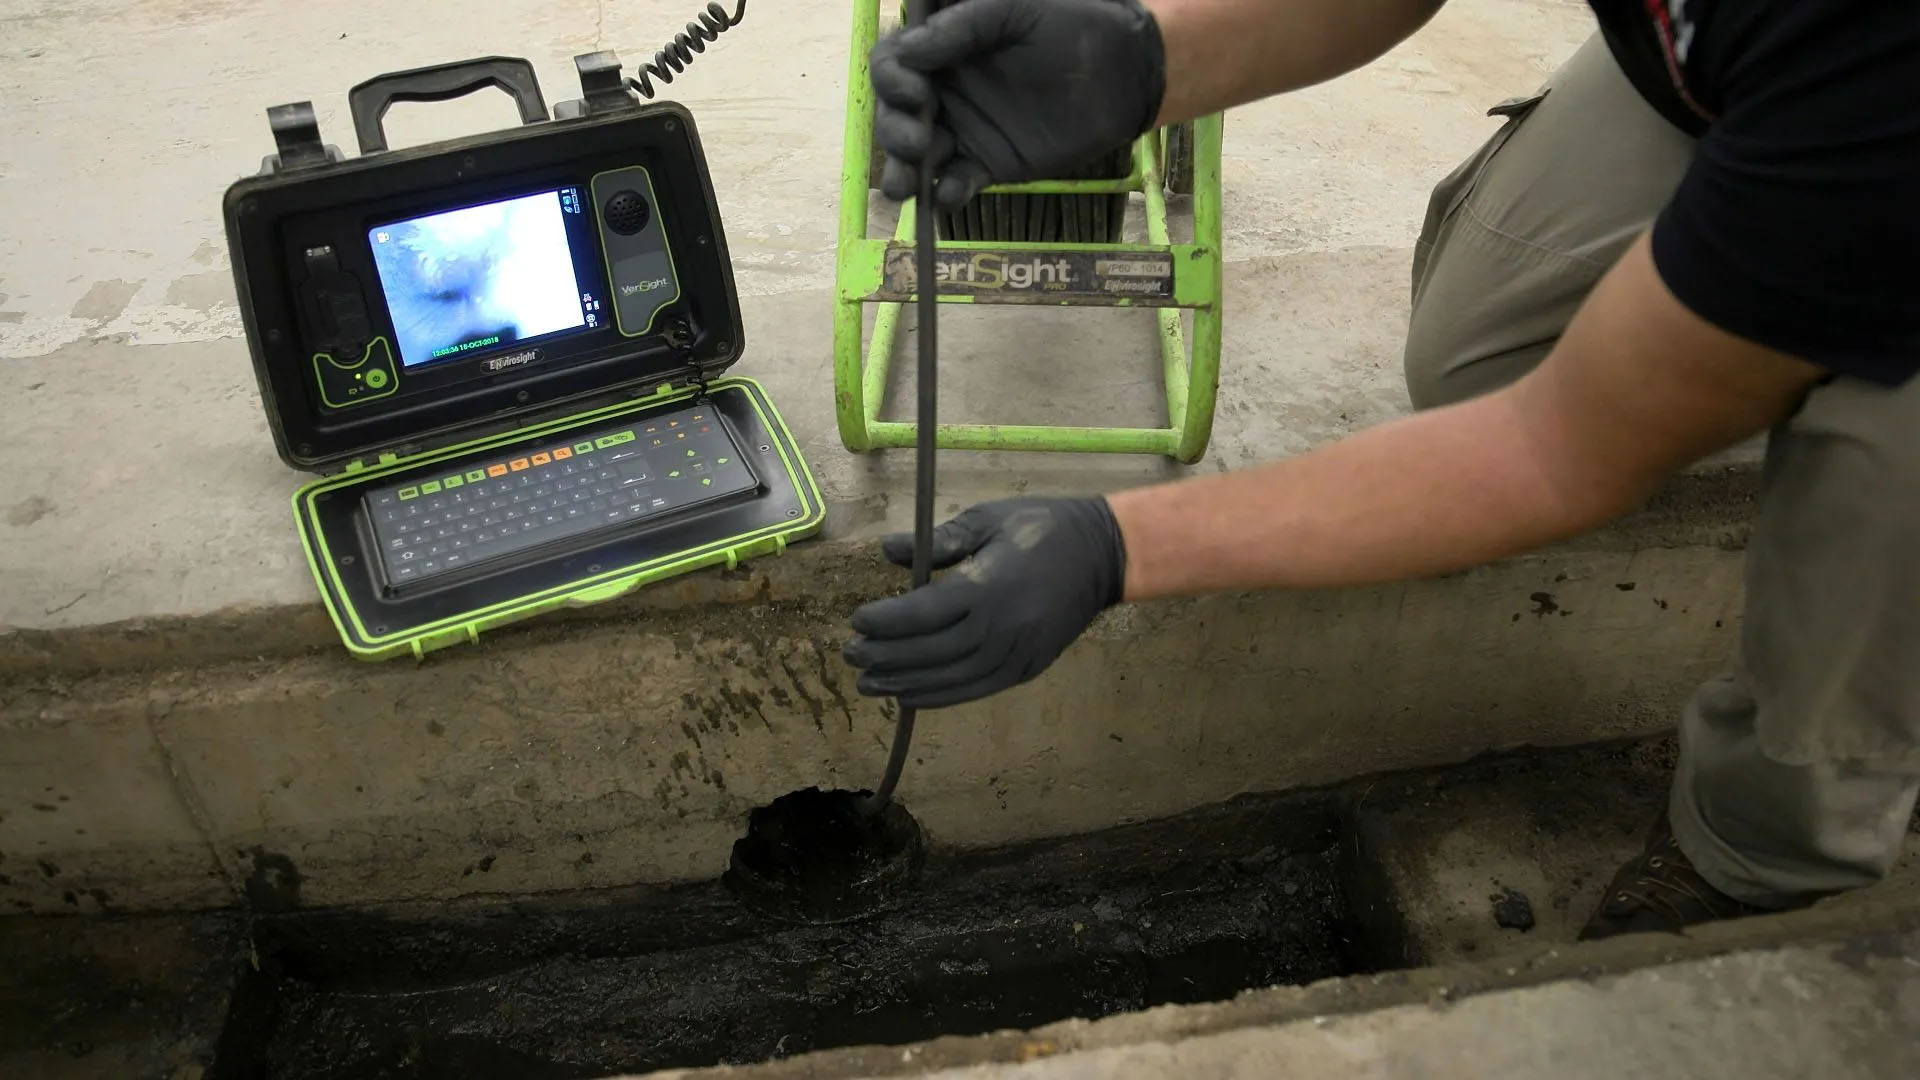 Offering state-of-the-art septic and drain video vnspection services to all of Northwest Pennsylvania.